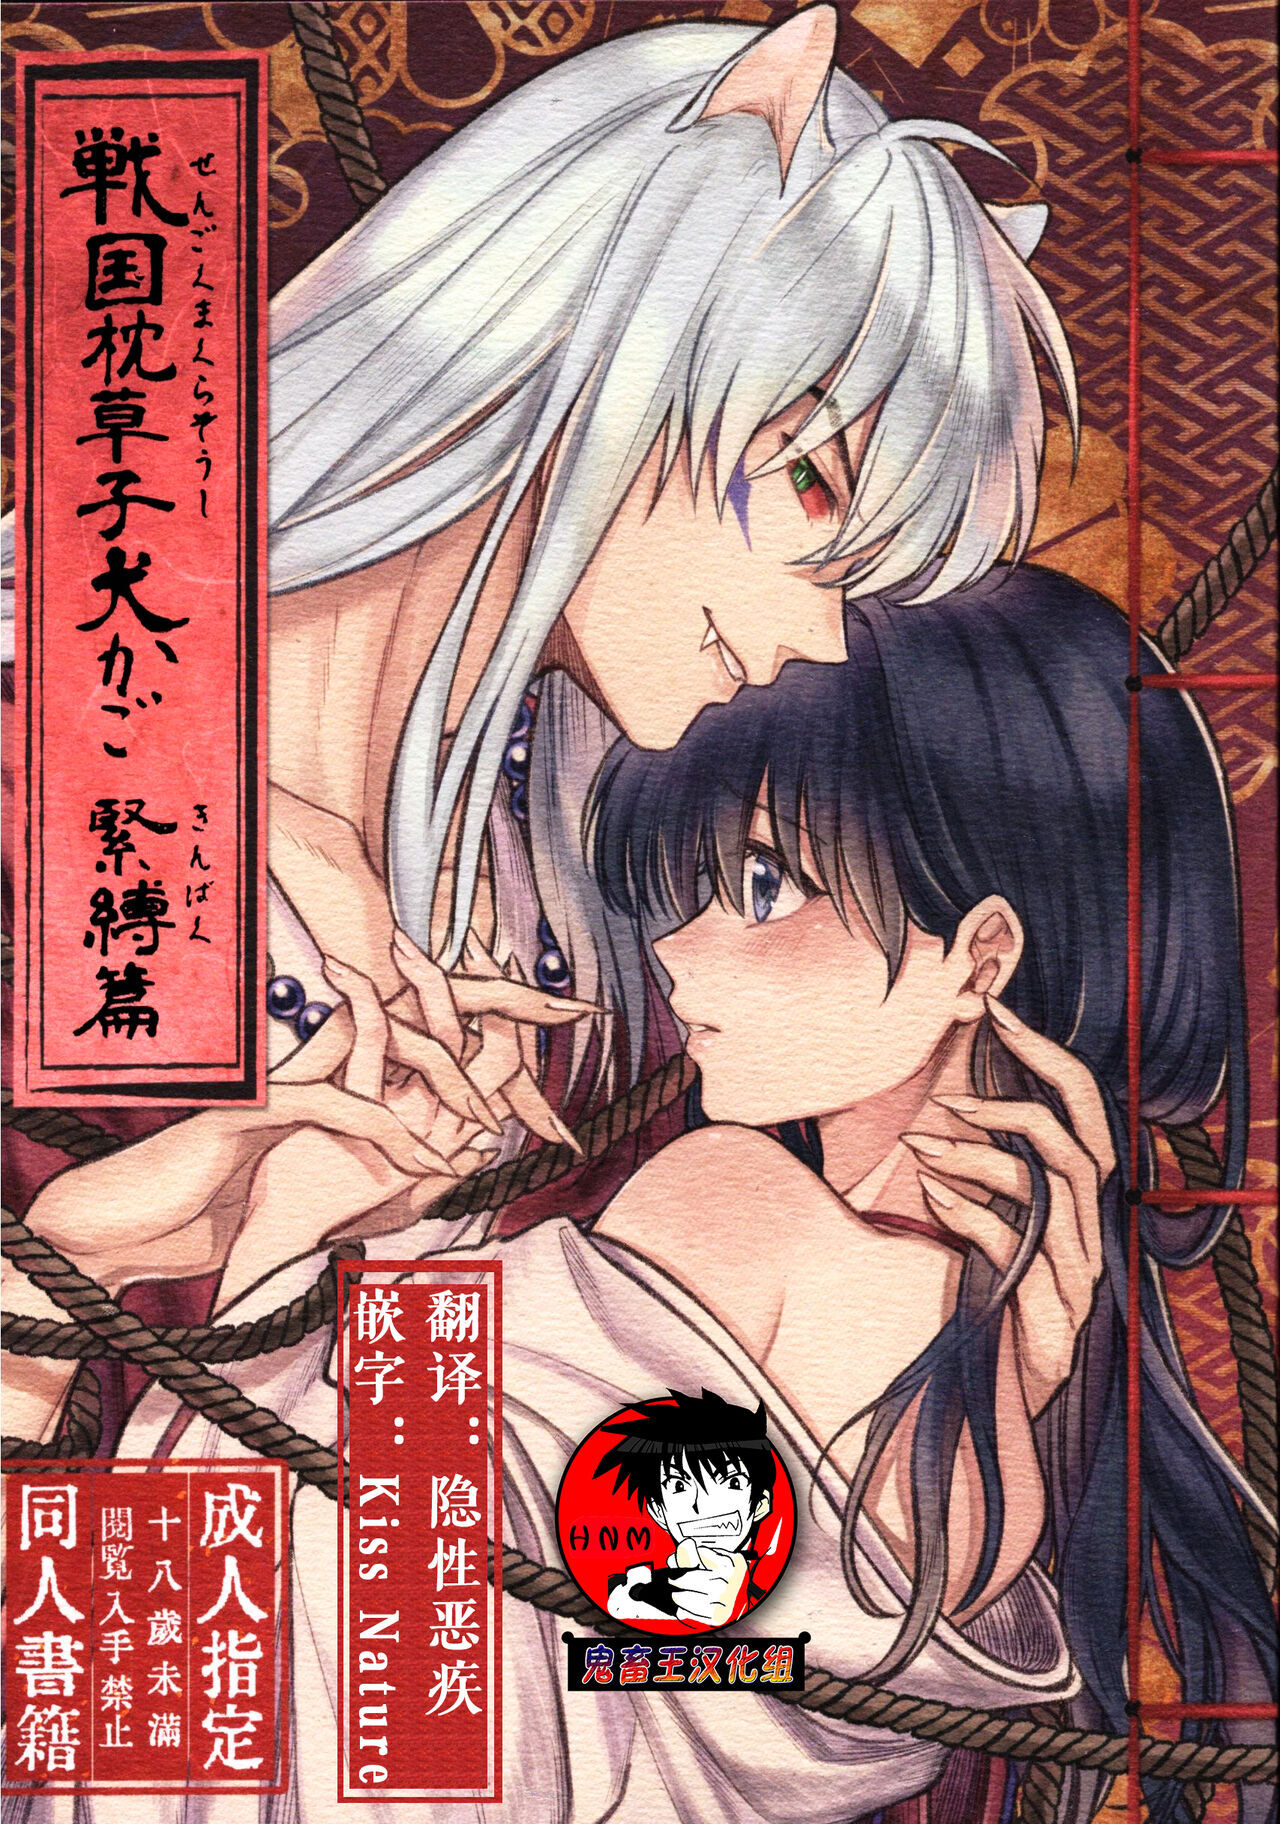 Hentai Inuyasha Sex - Inuyasha - sorted by number of objects - Free Hentai